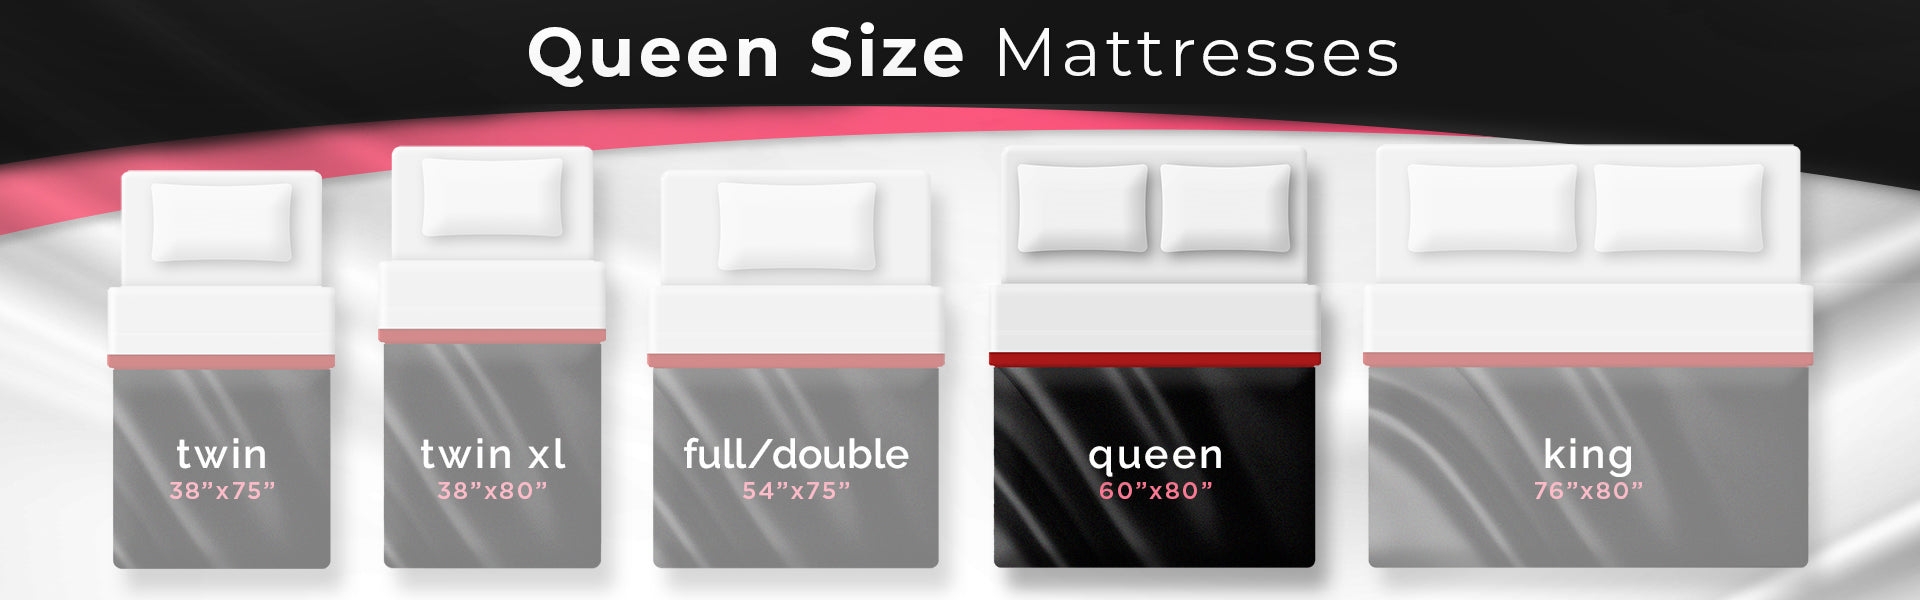 5 illustrated mattresses , queen size mattress dimensions highlighted 